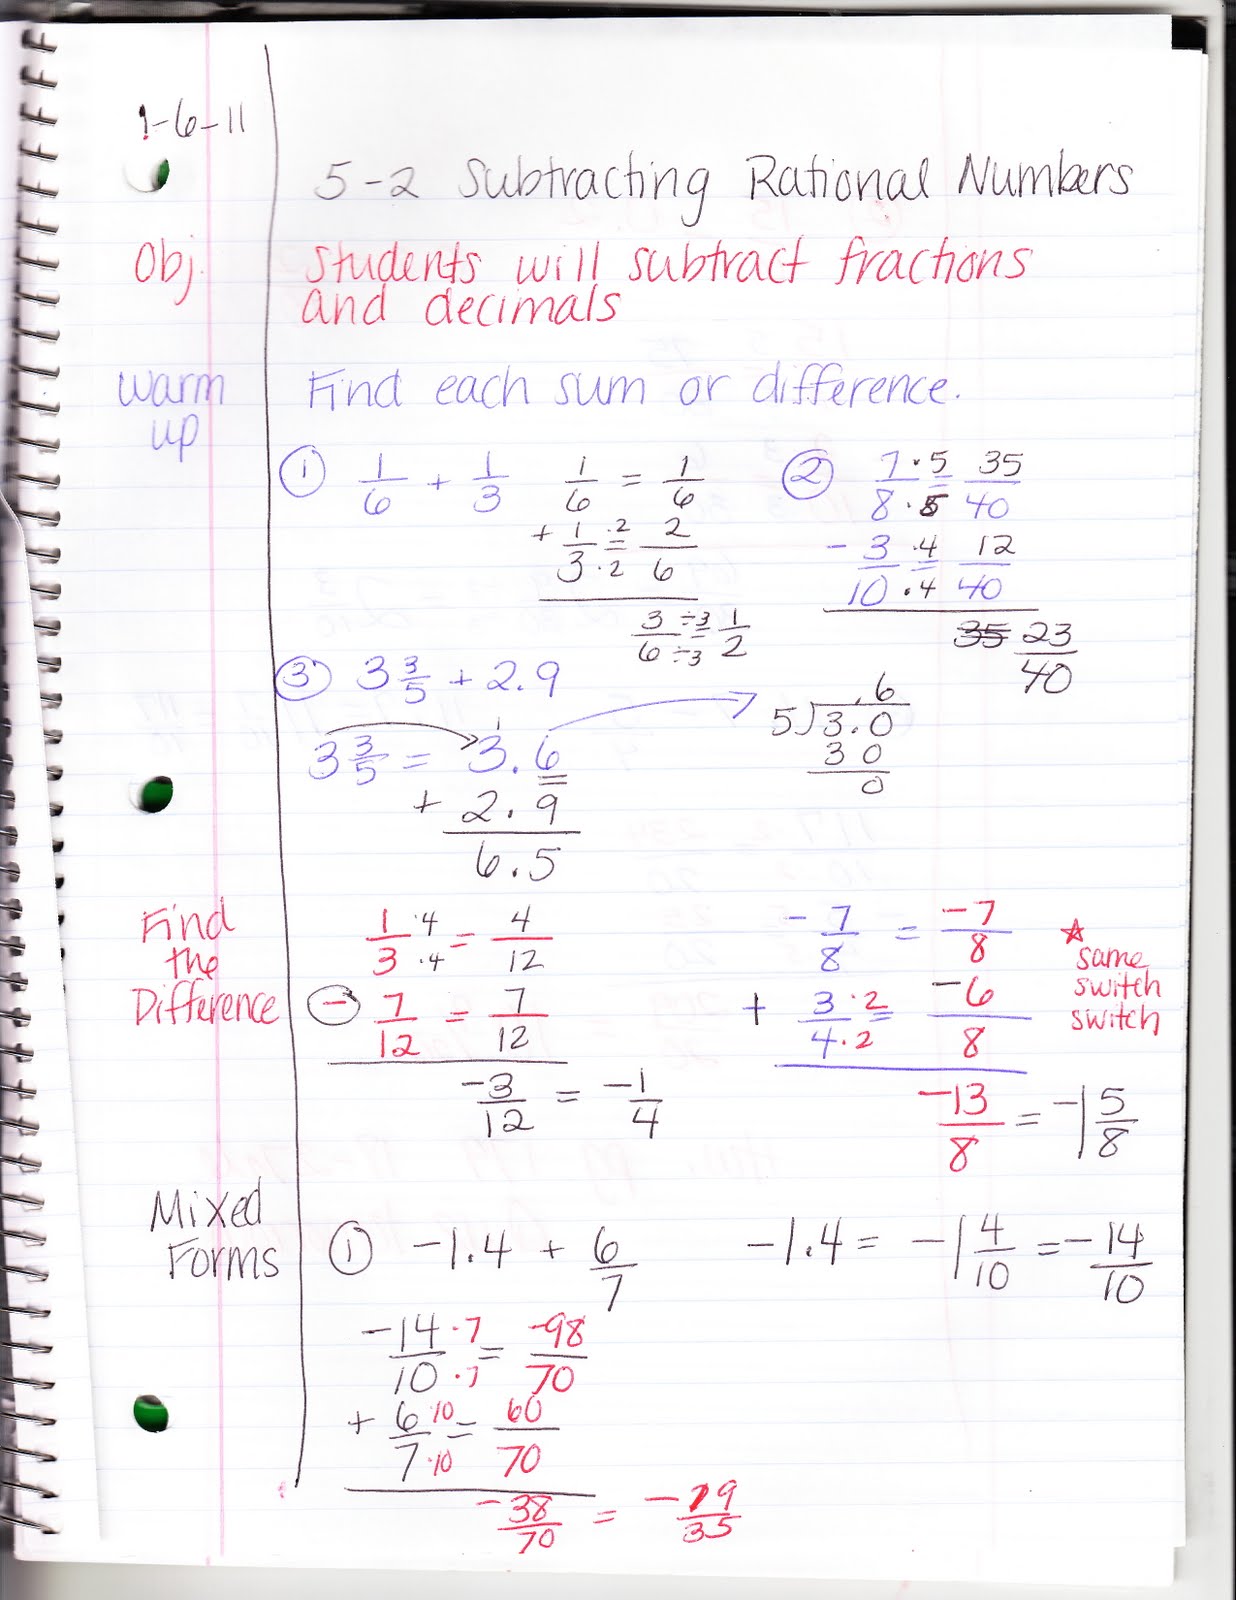 ms-jean-s-algebra-readiness-blog-5-2-subtracting-rational-numbers